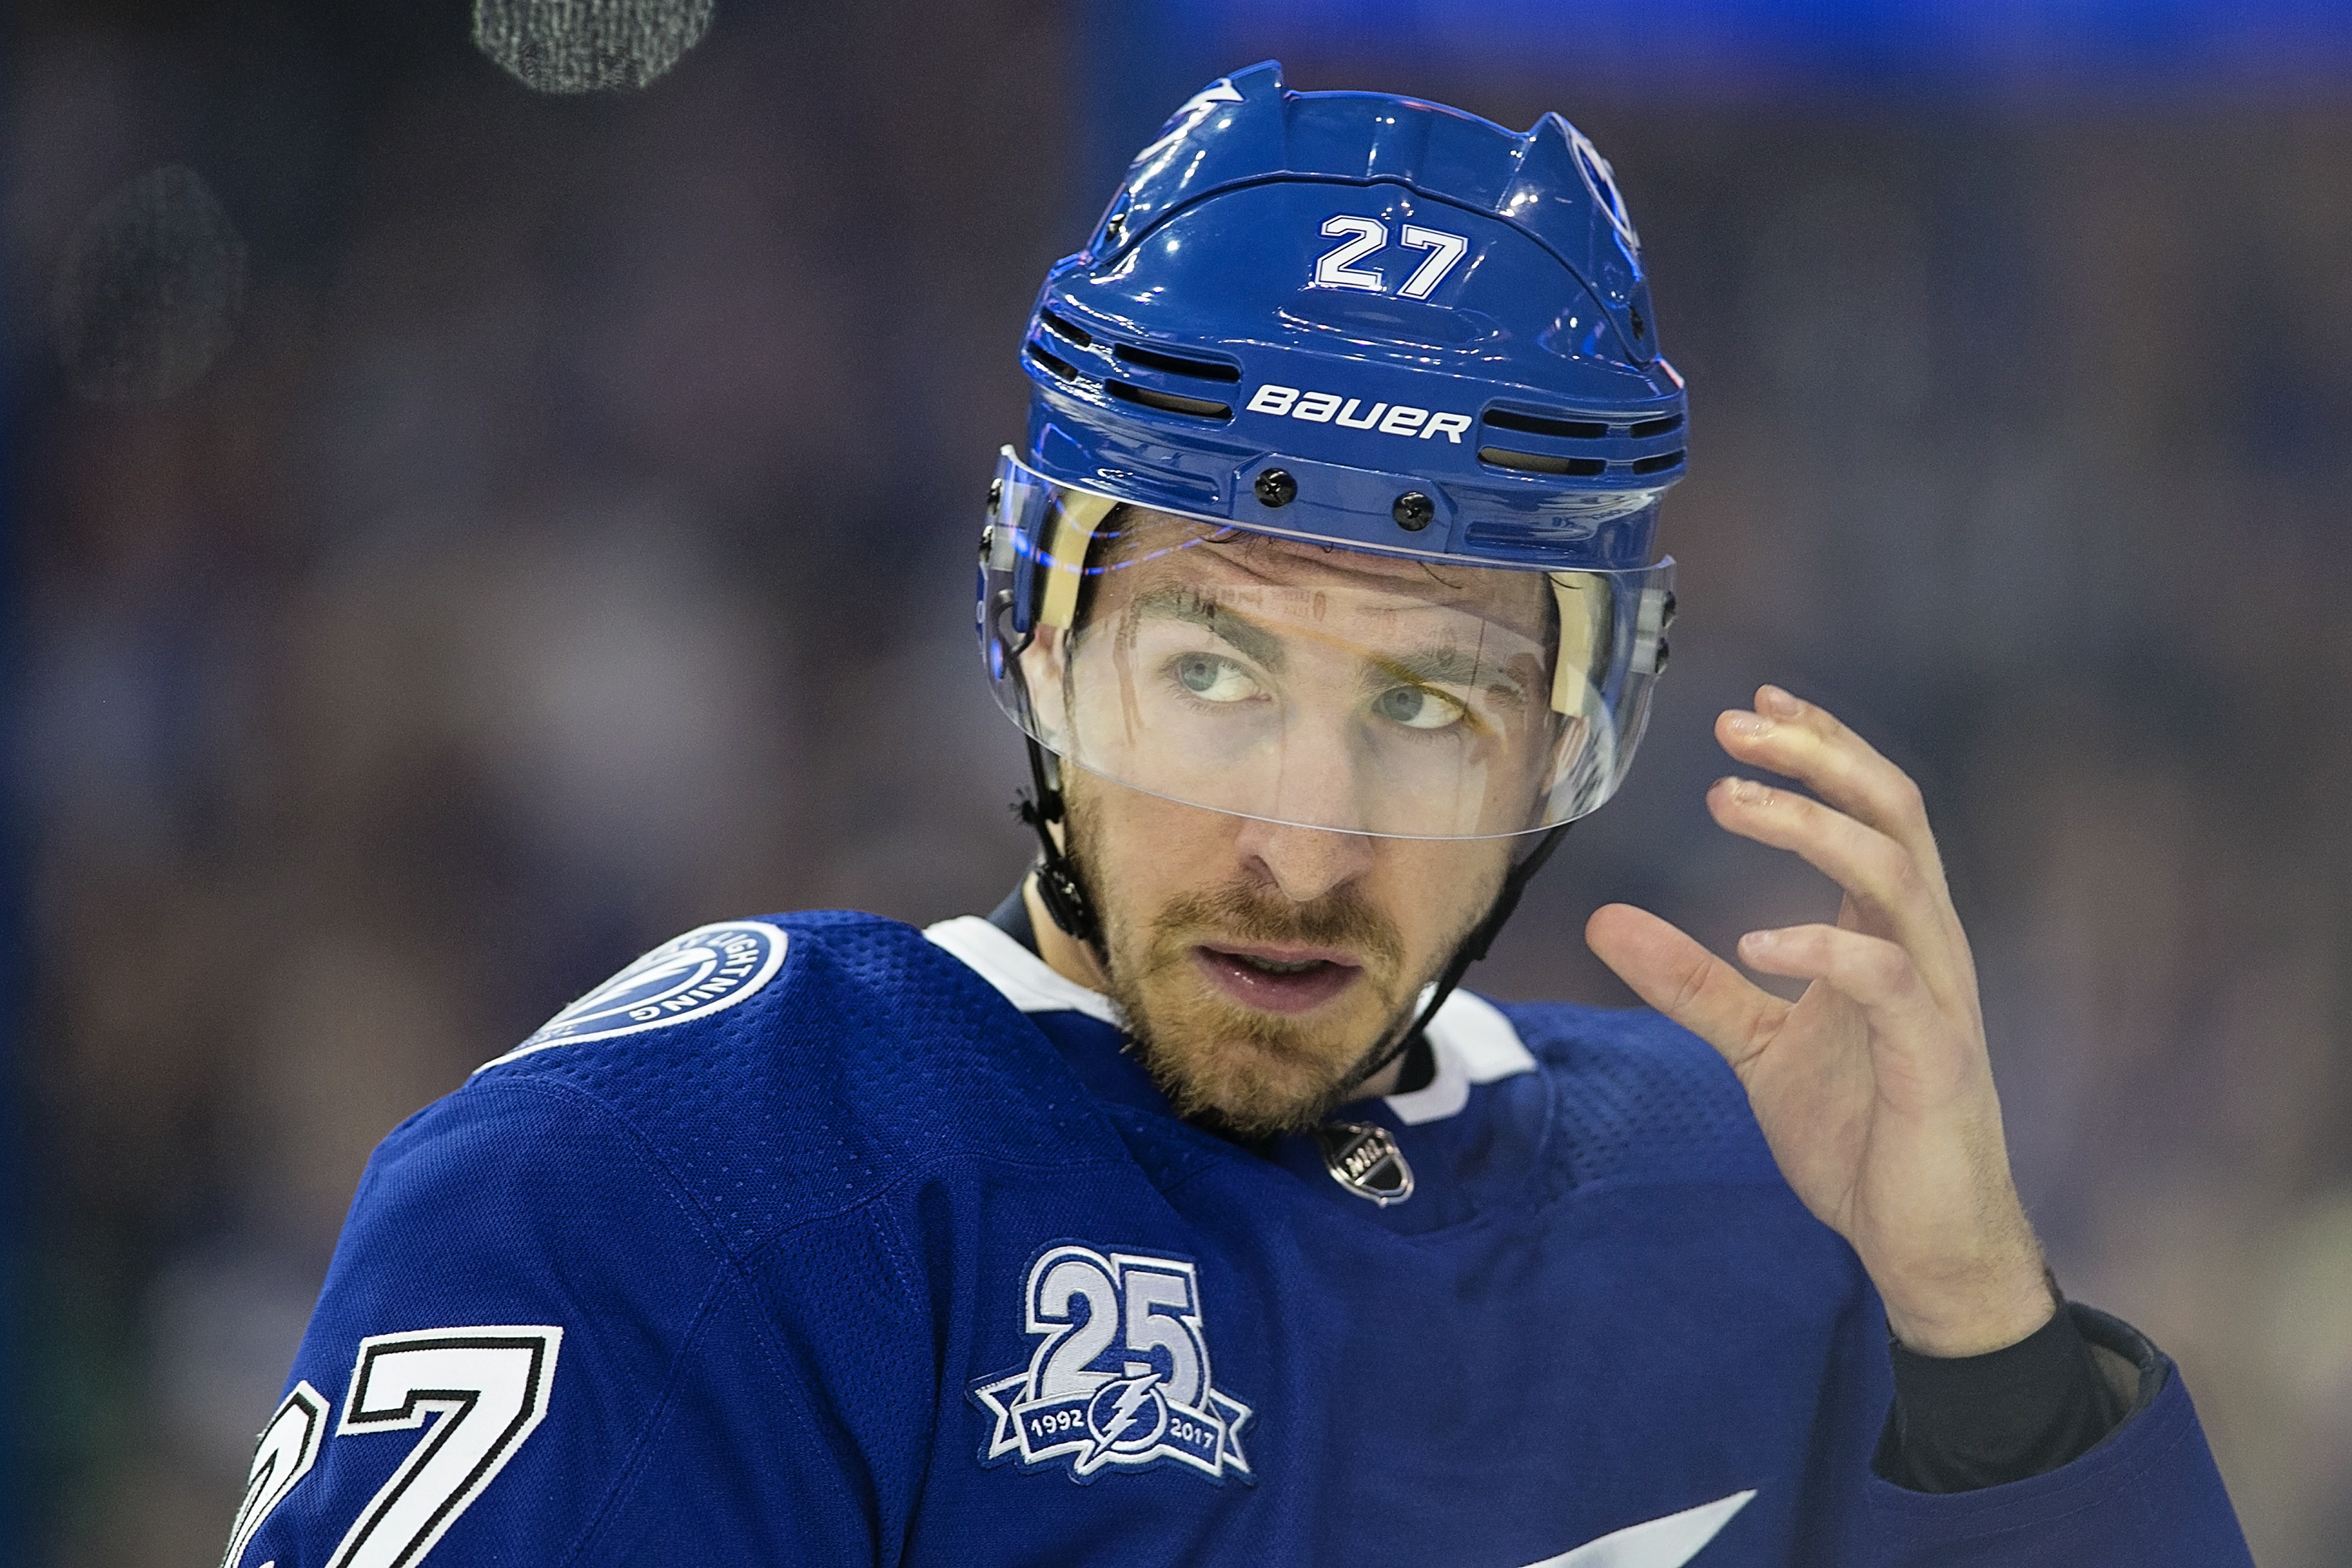 McDonagh needs to show why Bolts traded for him./CARMEN MANDATO